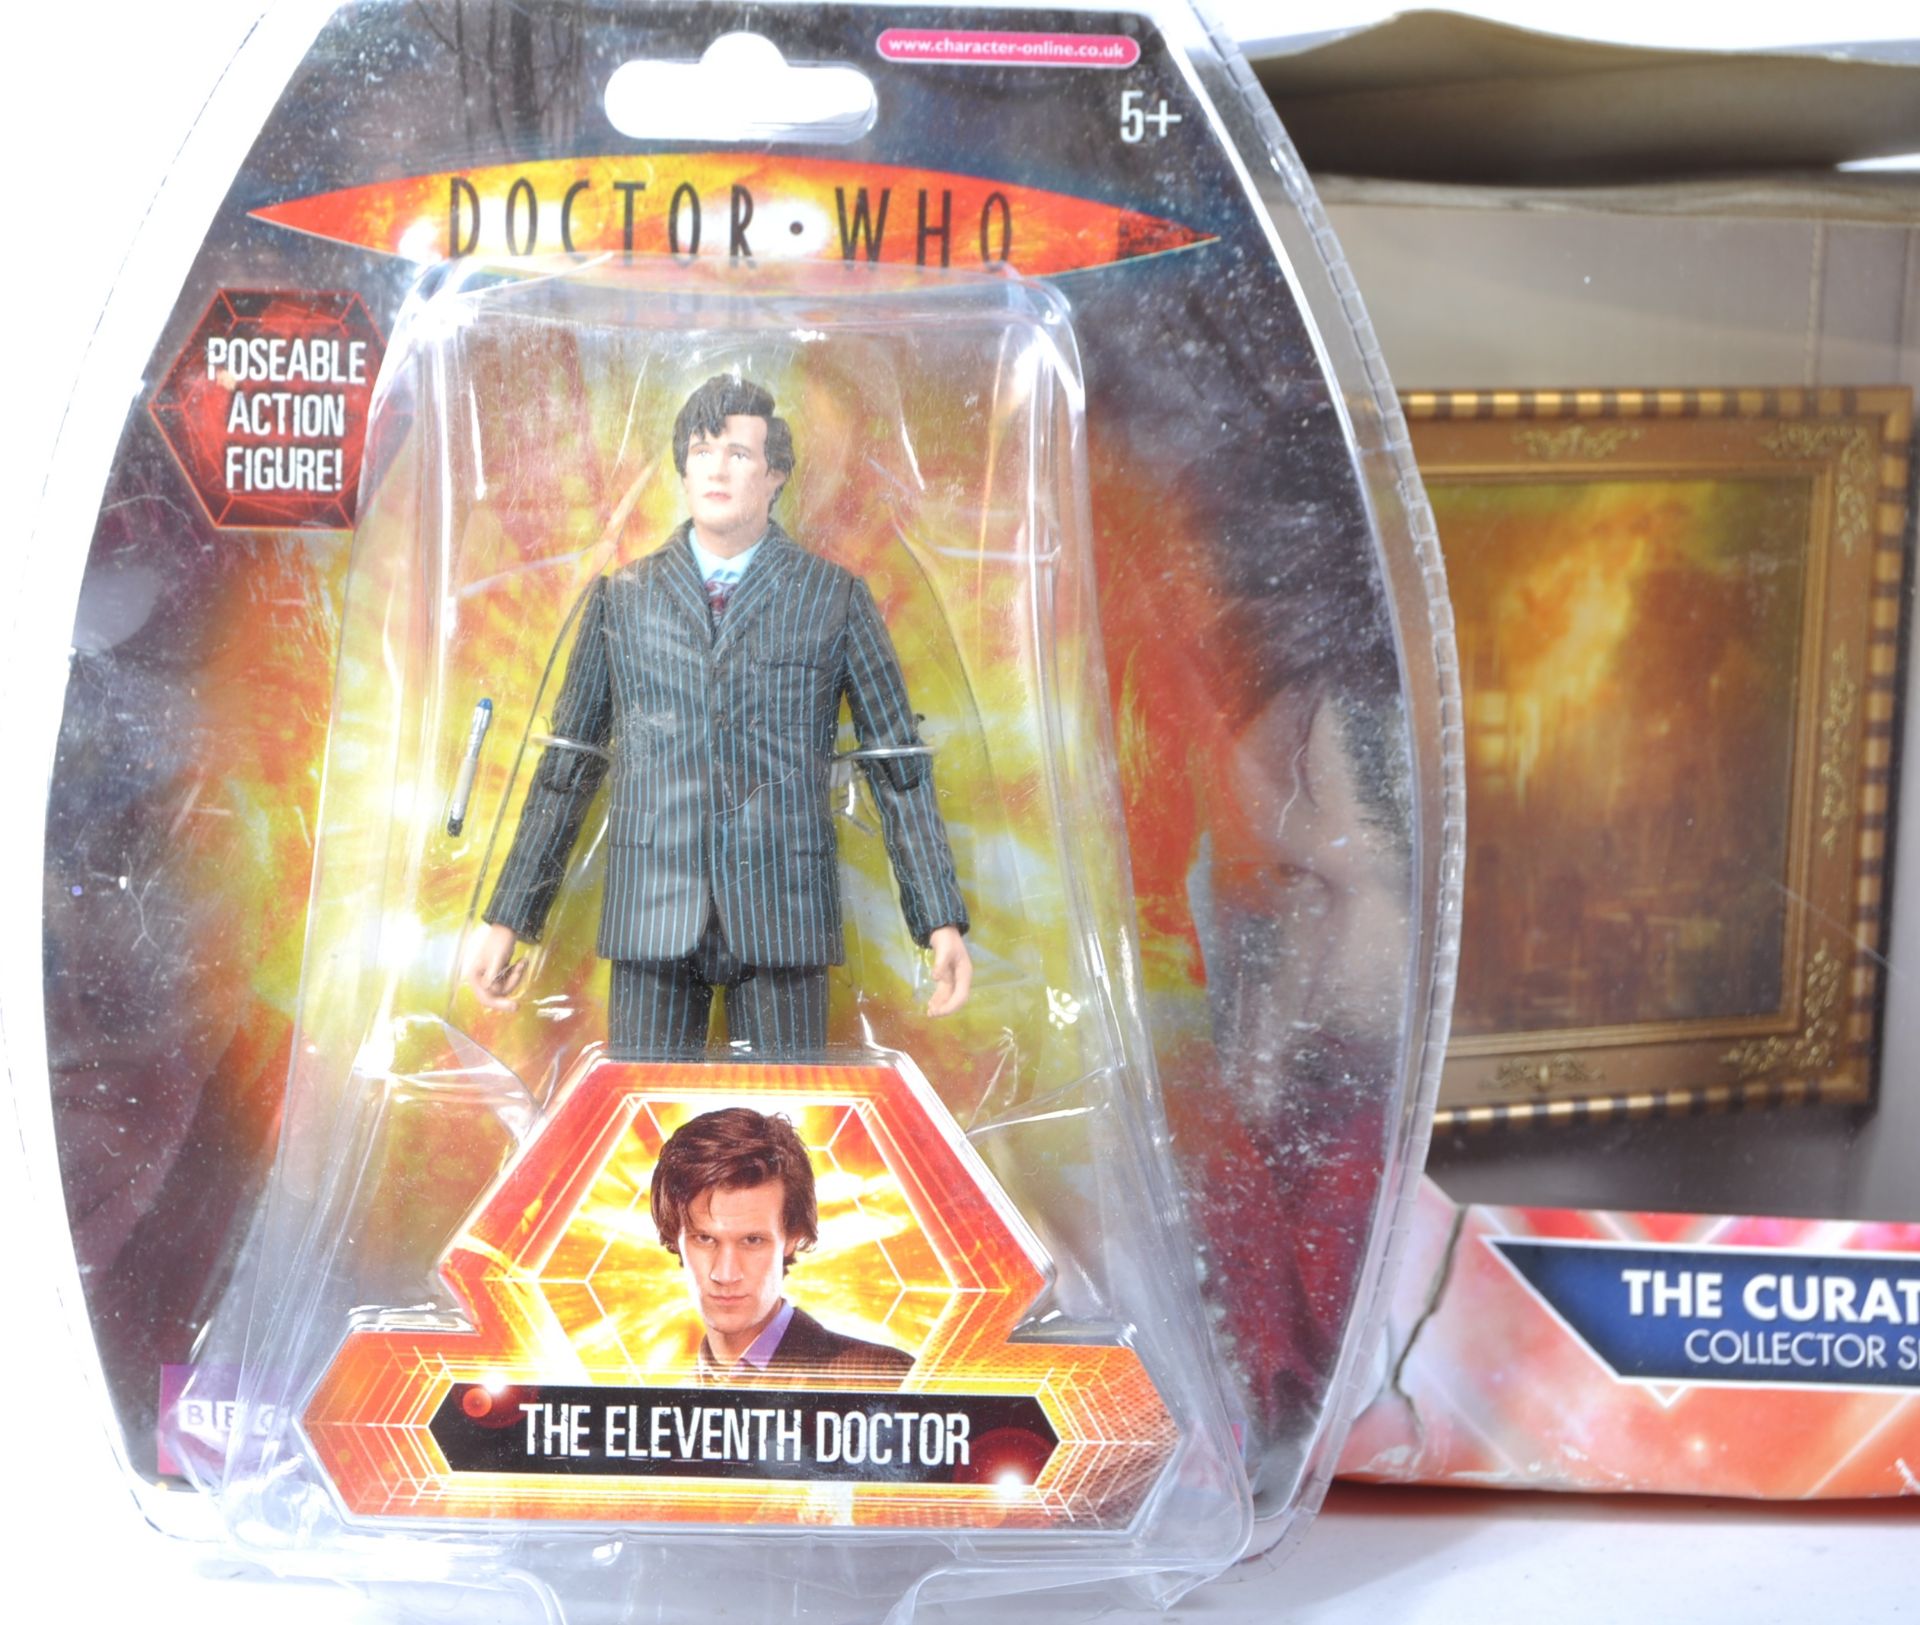 DOCTOR WHO - CHARACTER / UT TOYS - ASSORTED FIGURES - Image 5 of 5